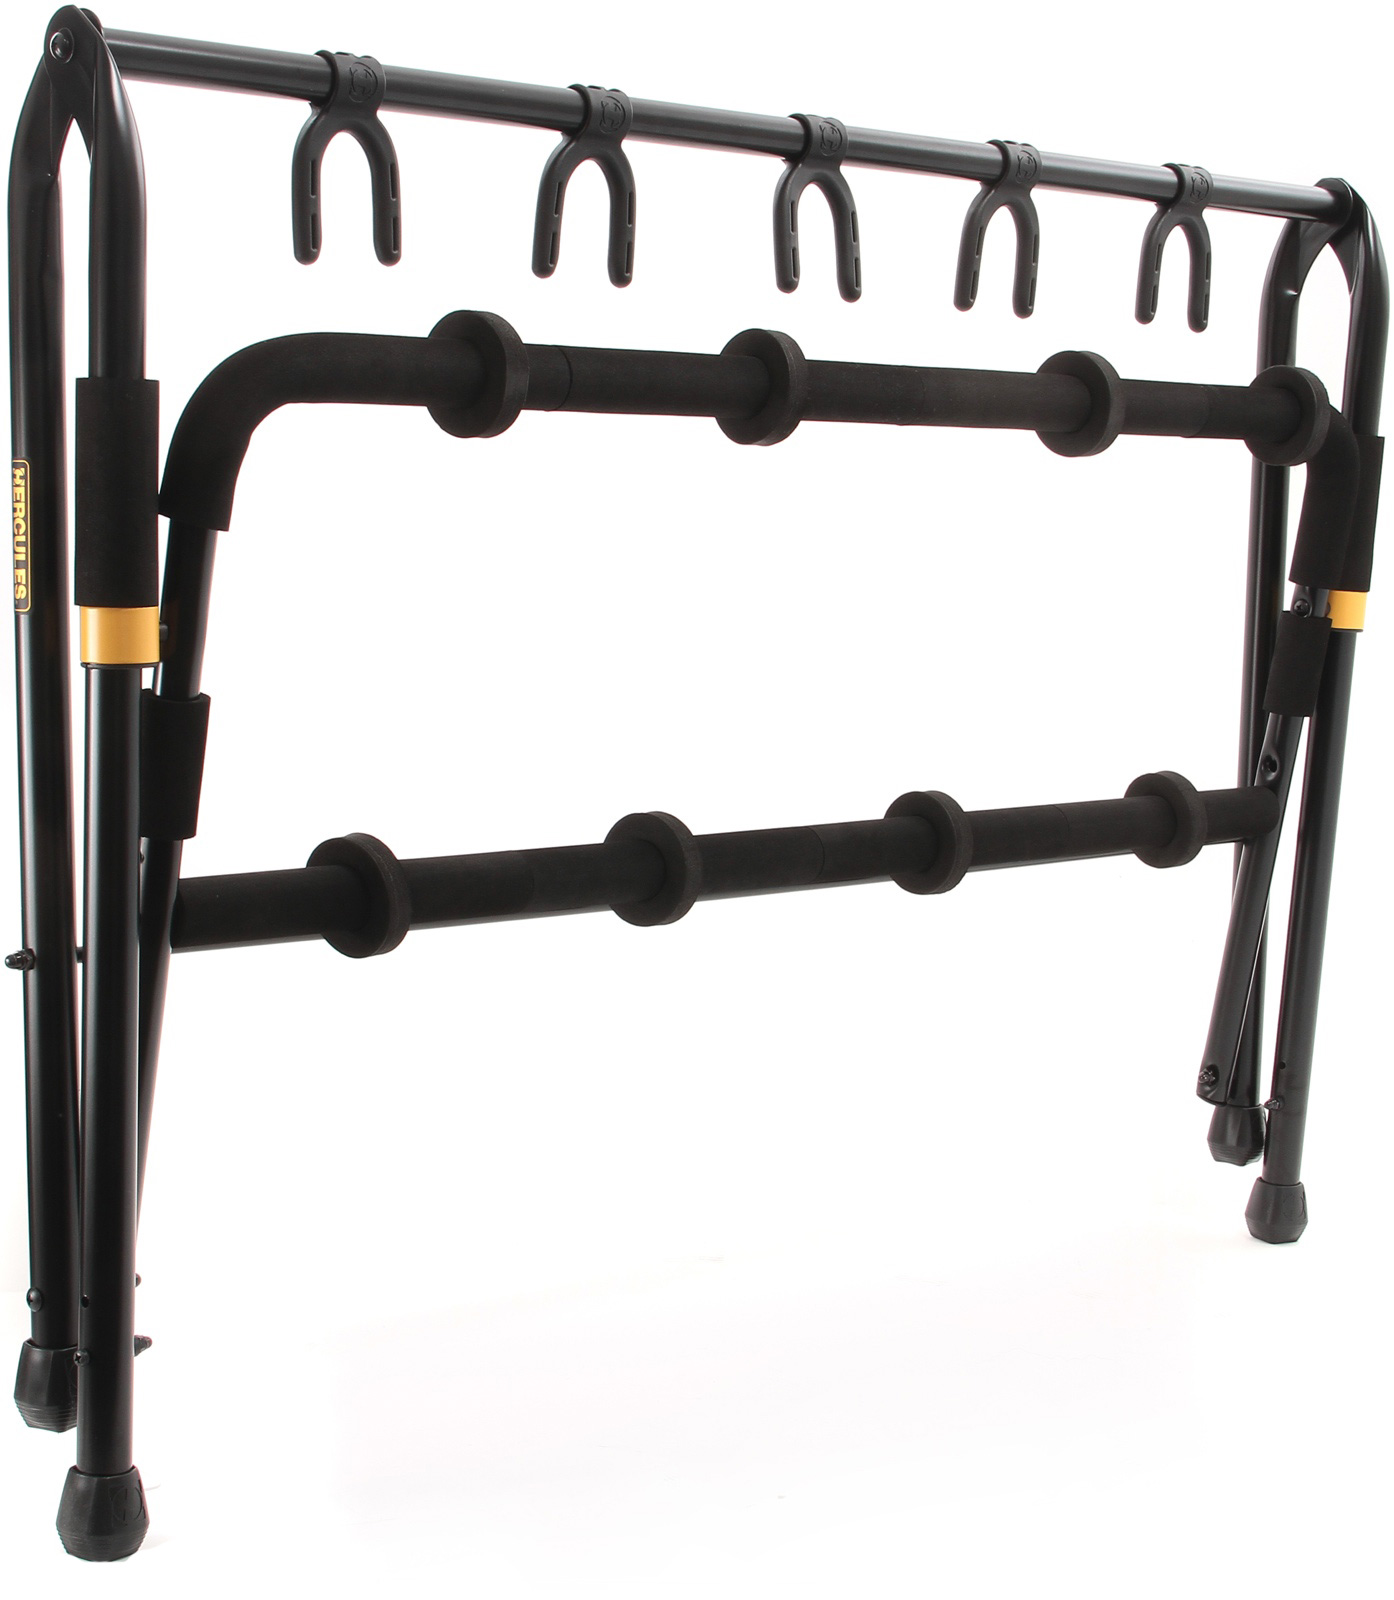 Hercules Stand Gs525b Floor Rack 5-guitars Stand - Stand & Support Guitare & Basse - Variation 4